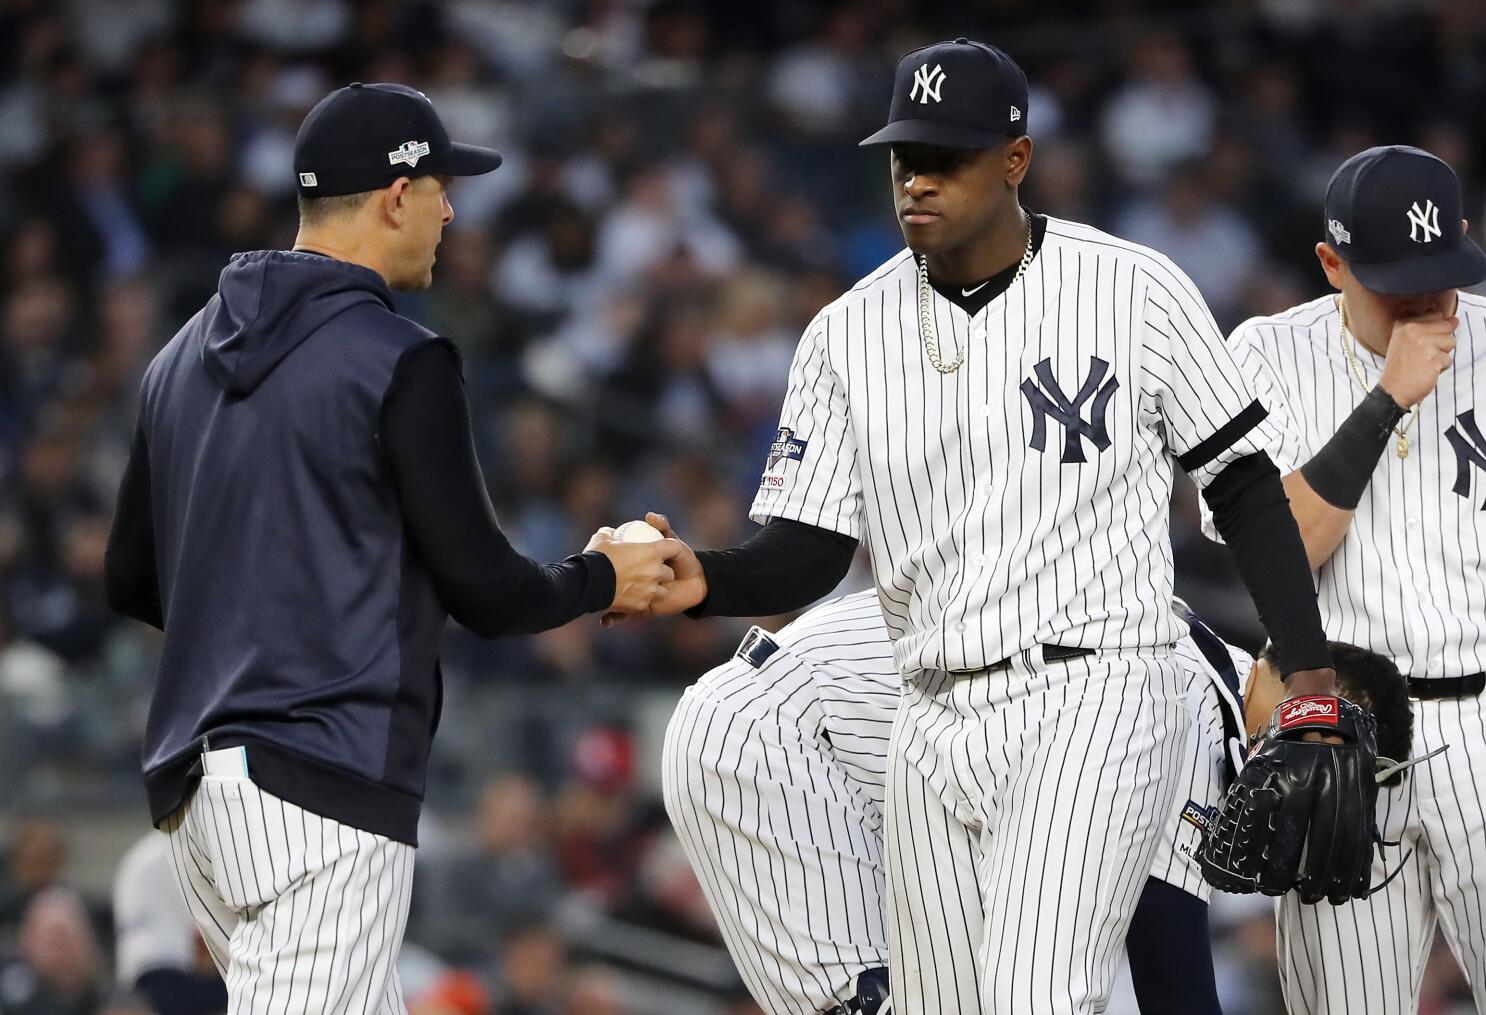 The Yankees should ditch the road gray uniformsometimes